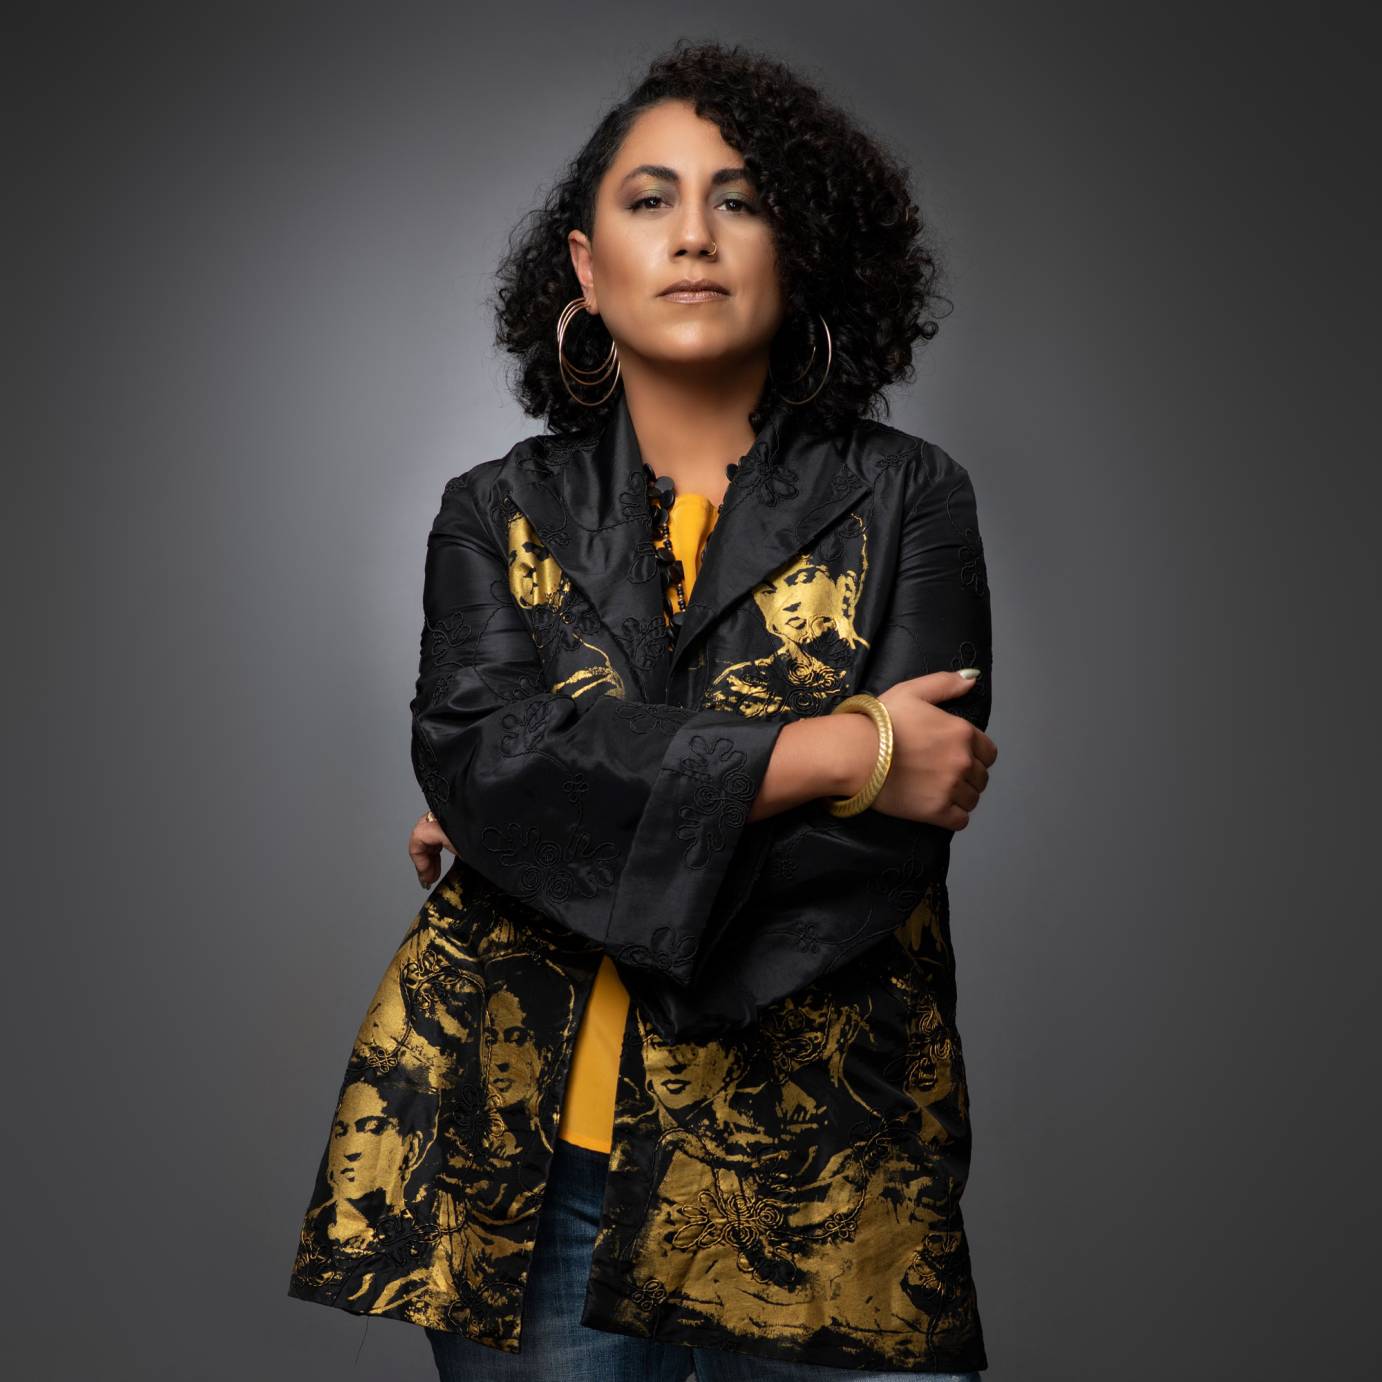 photo of a light brown skinned woman composer Taina Asili staring at us. She wears large hoop earrings a bright yellow shirt and blue jeans topped off by a loose fitting black jacket decorated with gold images of Frida Kahlo. 